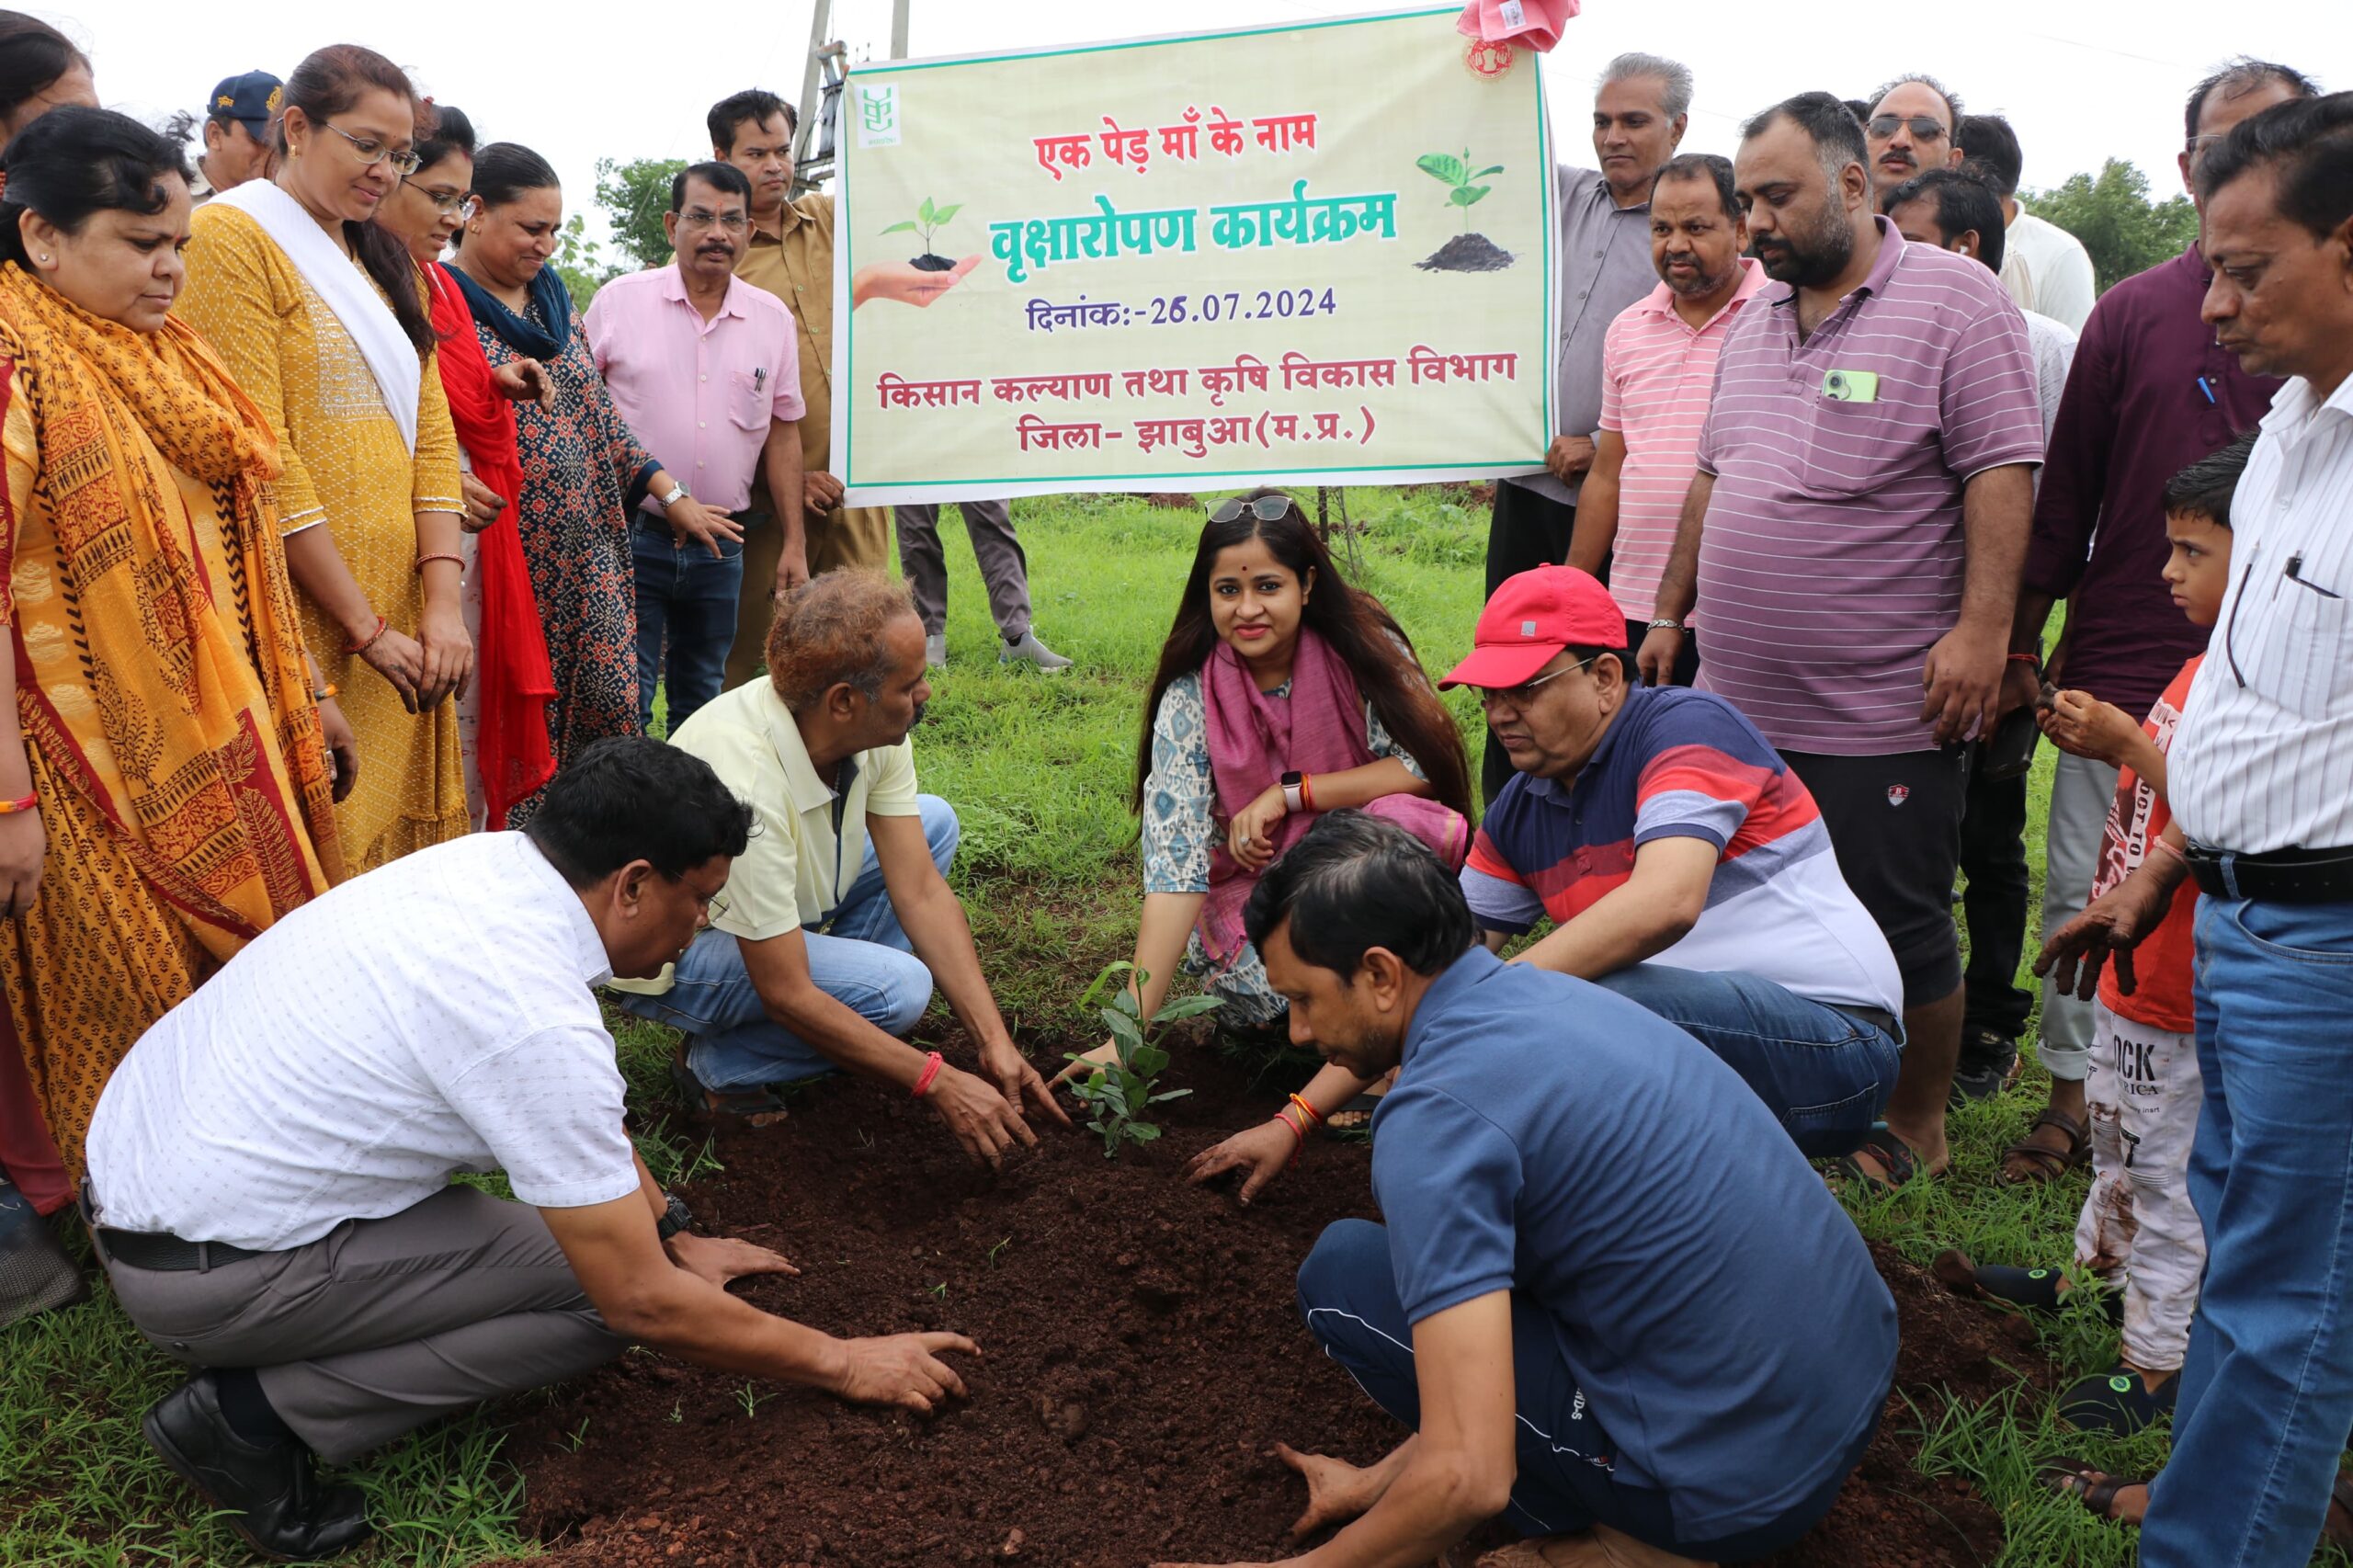 Tree plantation was done on Hathipawa Hill under the campaign “One Tree in the Name of Mother”.